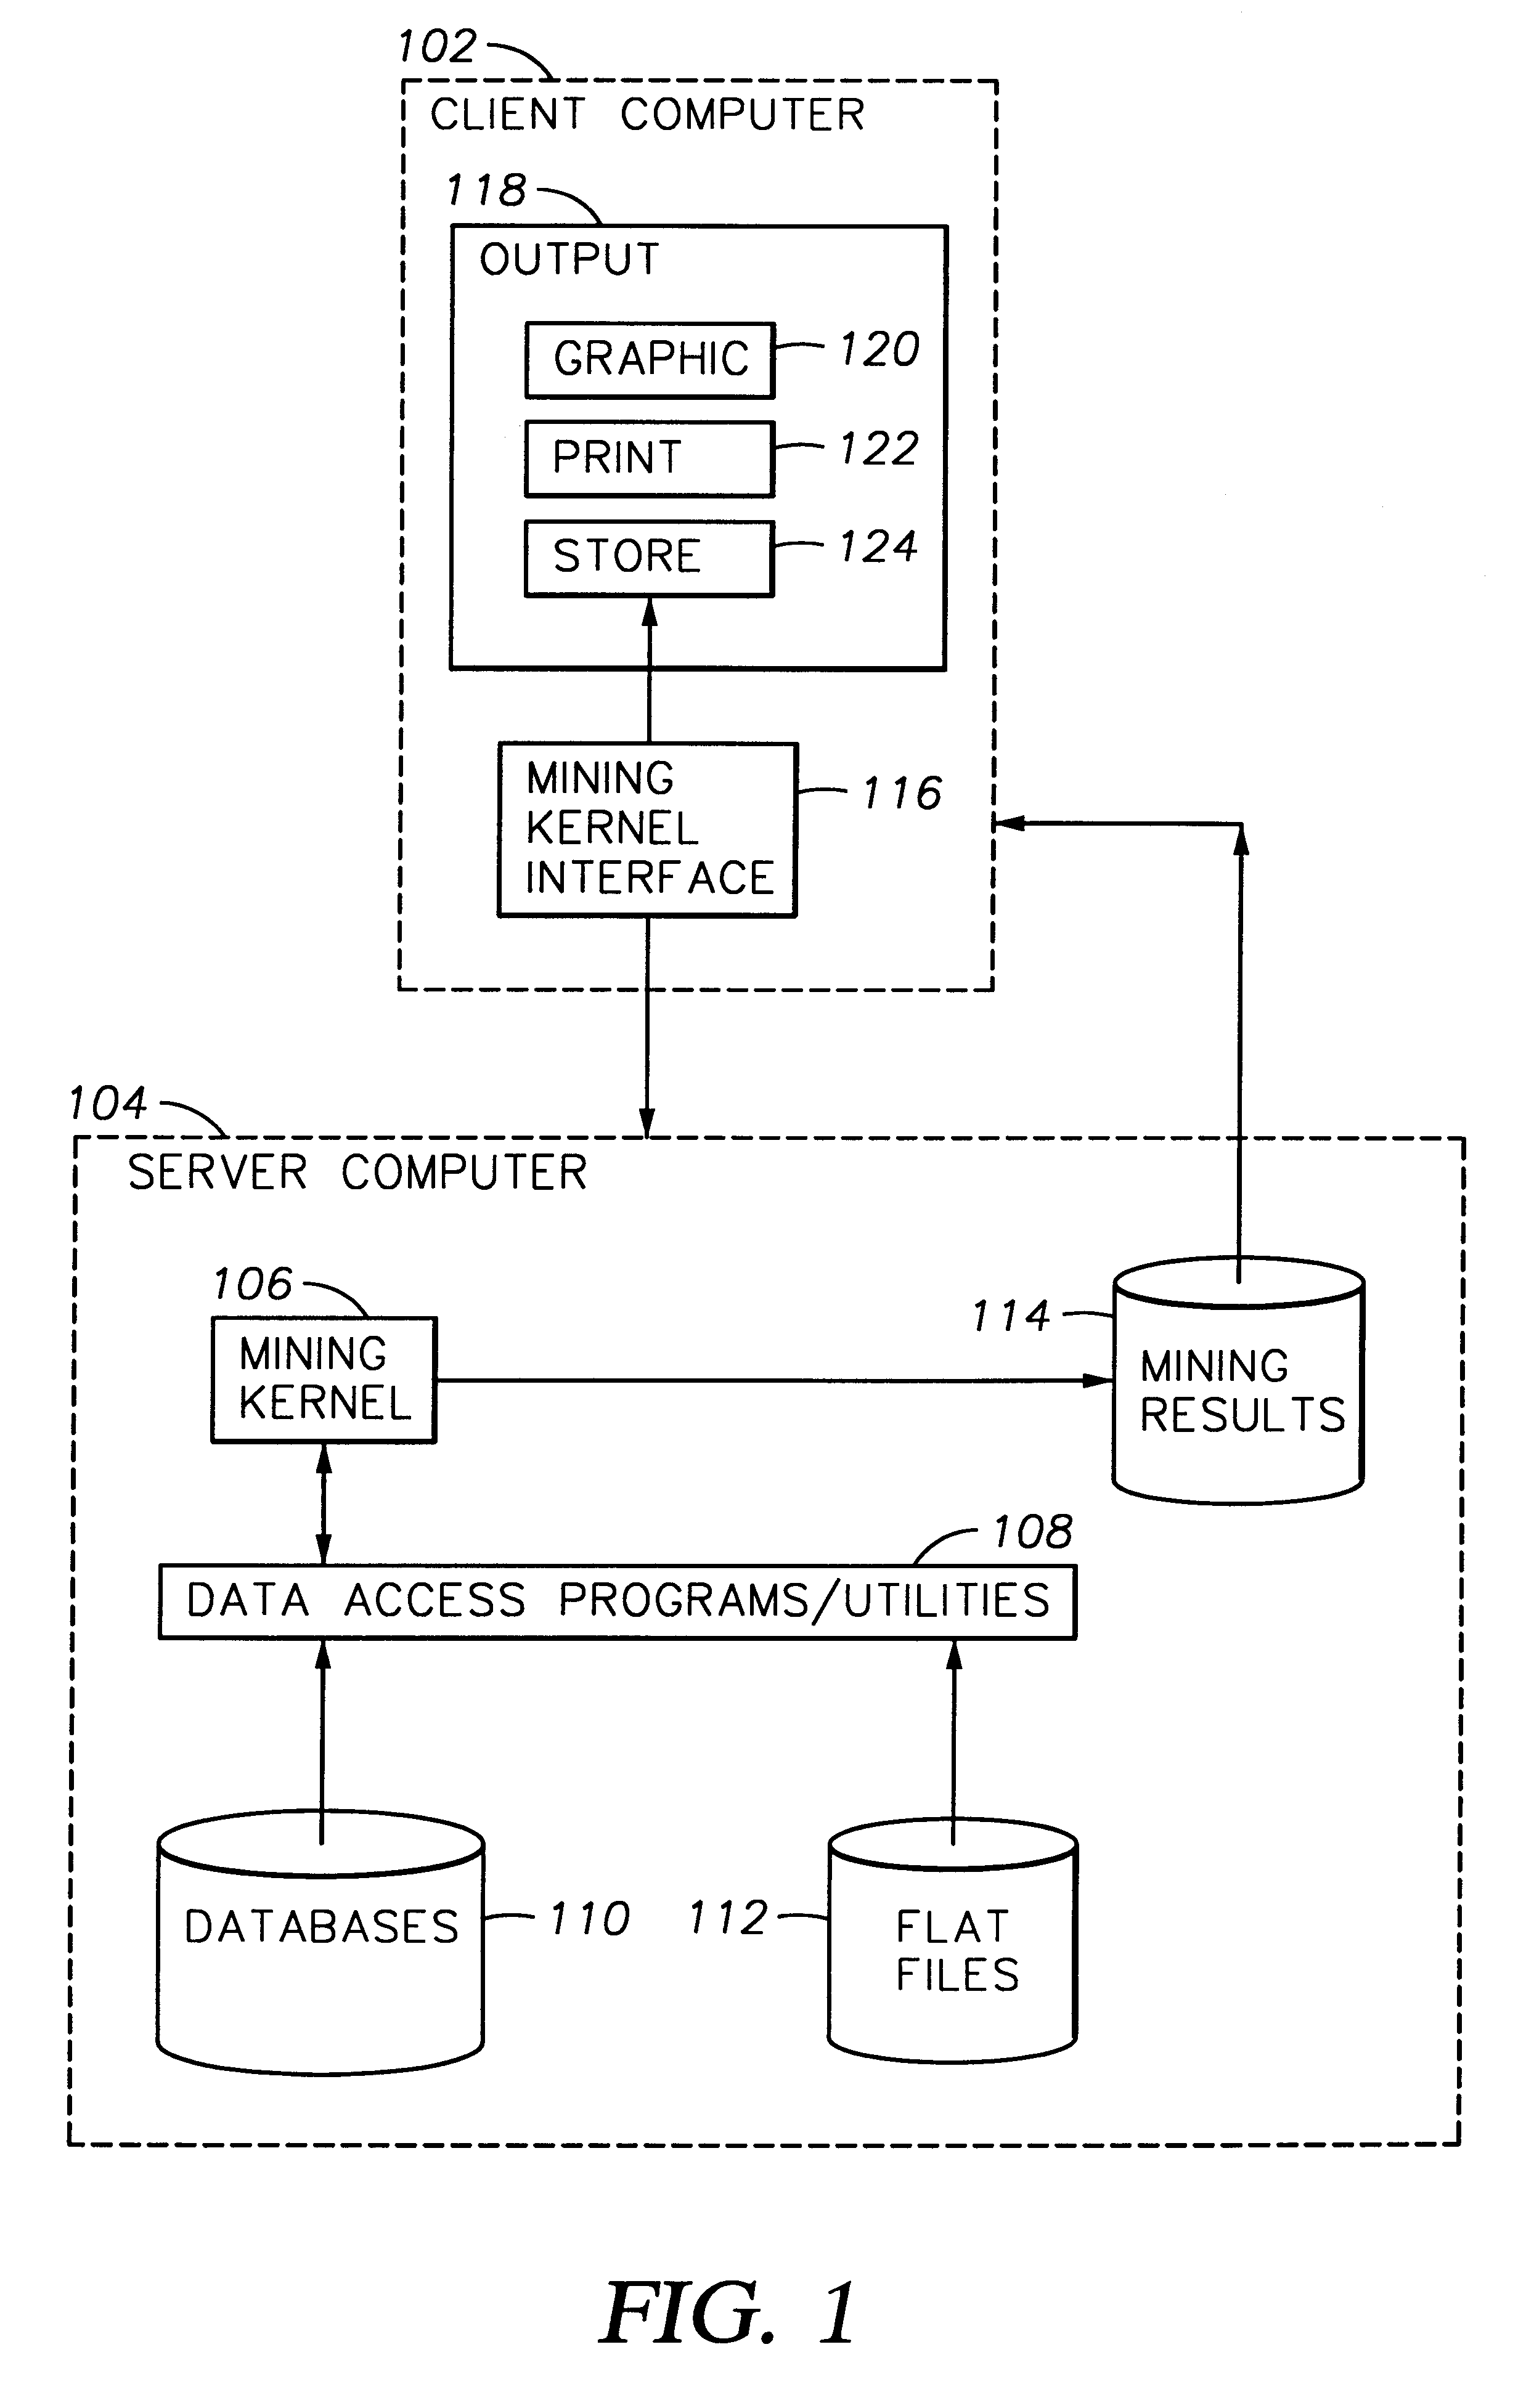 Method and apparatus for partitioning a database upon a timestamp, support values for phrases and generating a history of frequently occurring phrases